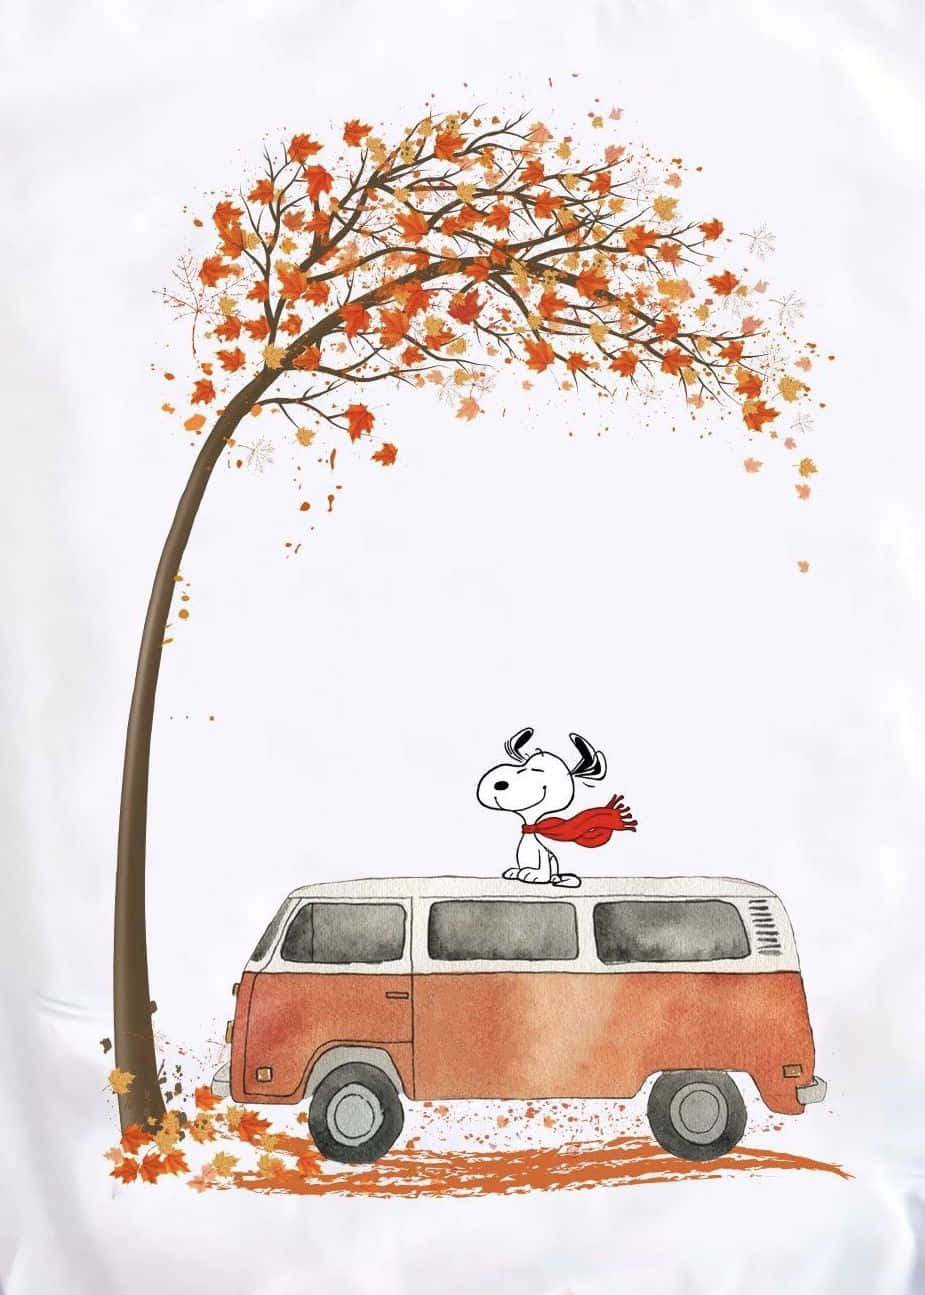 Snoopy takes a playful fall Wallpaper